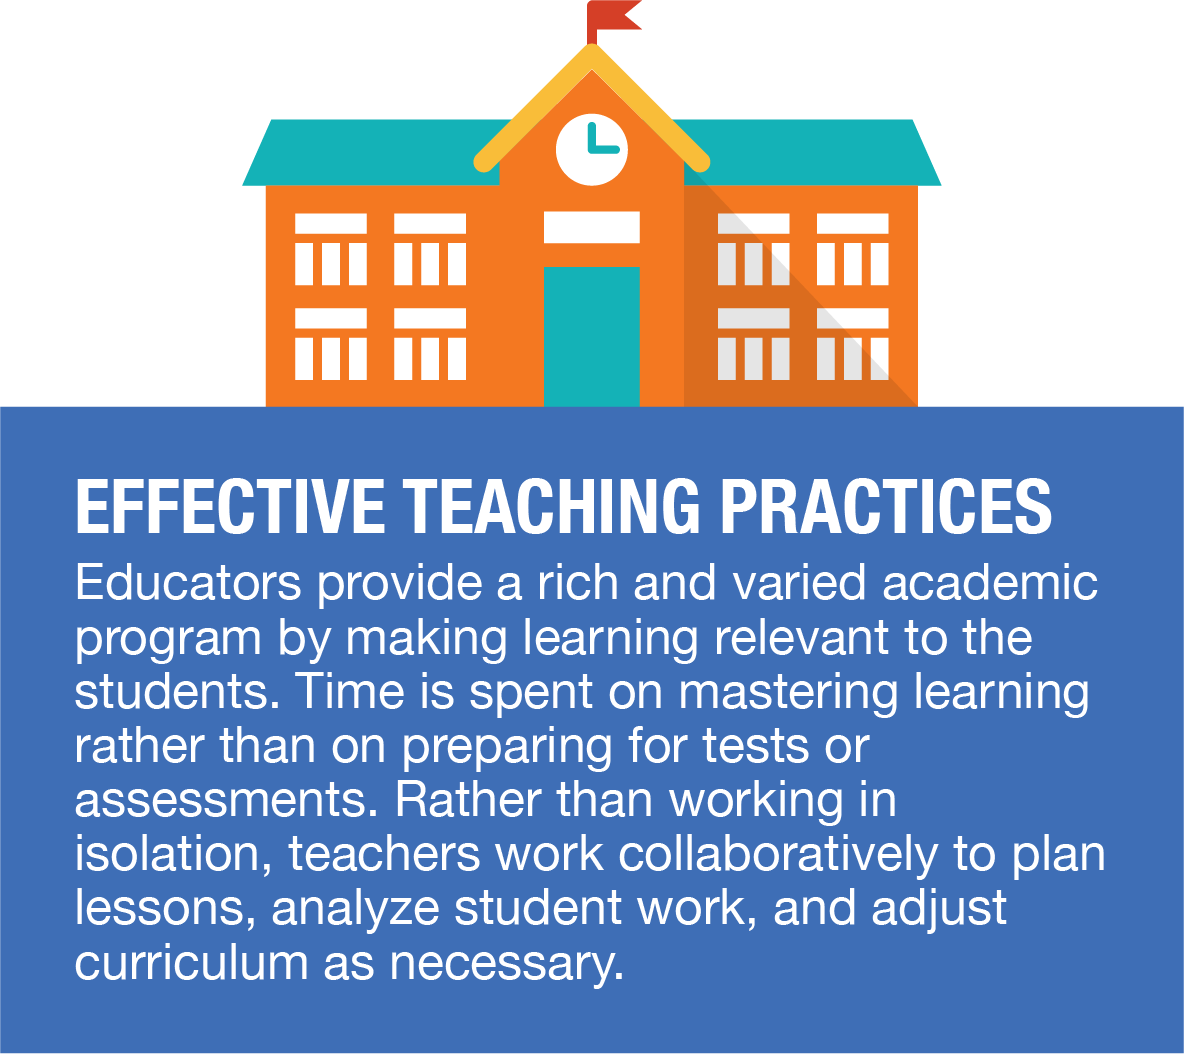 Effective Teaching Practices graphic